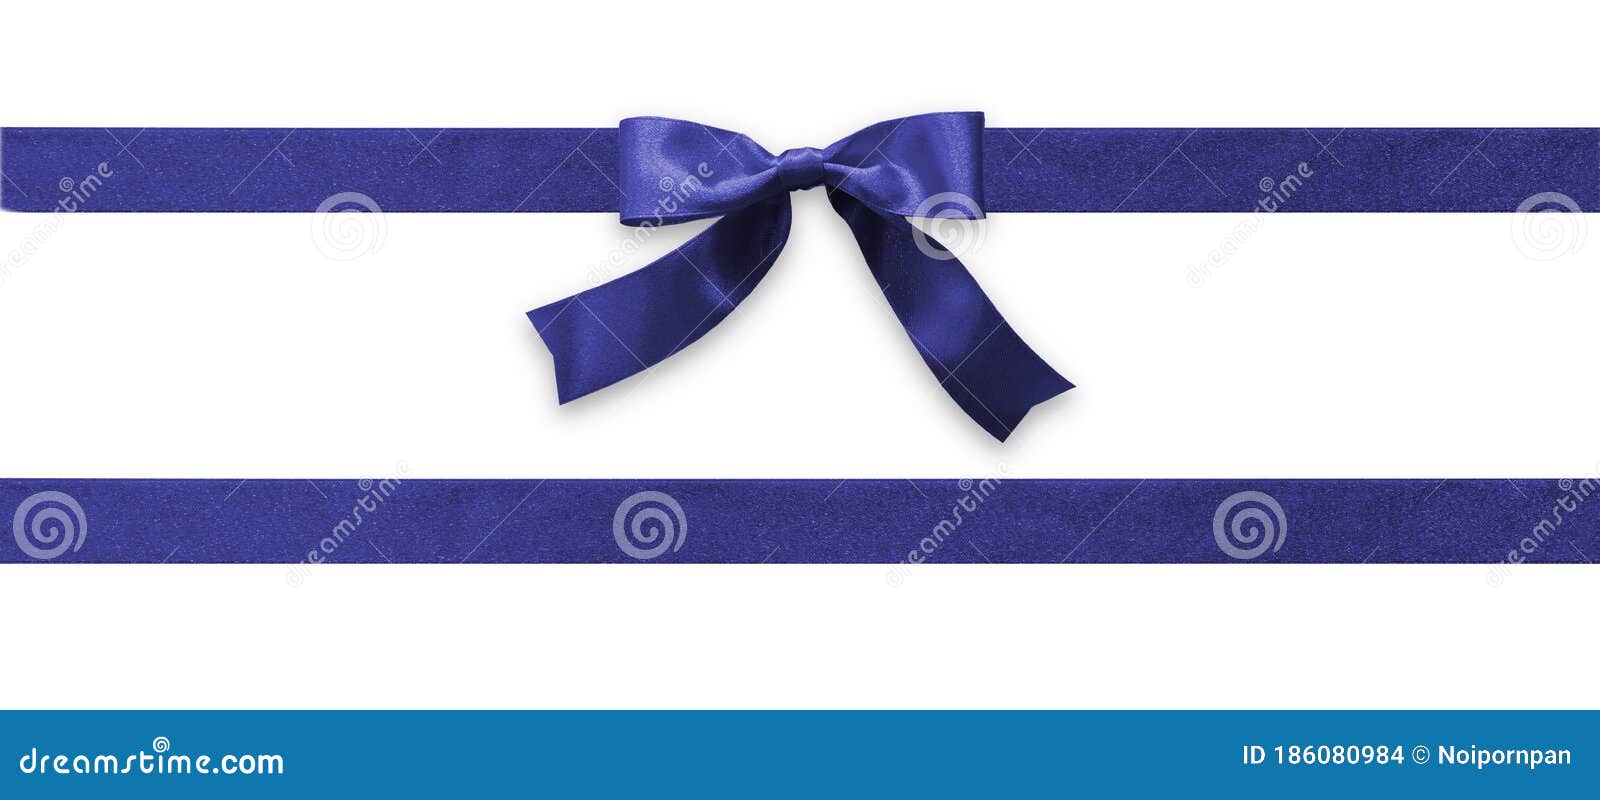 Dark Blue Bow Ribbon Band Satin Navy Stripe Fabric Isolated on White  Background with Clipping Path for Christmas Holiday Gift Stock Photo -  Image of ribbon, background: 186080984